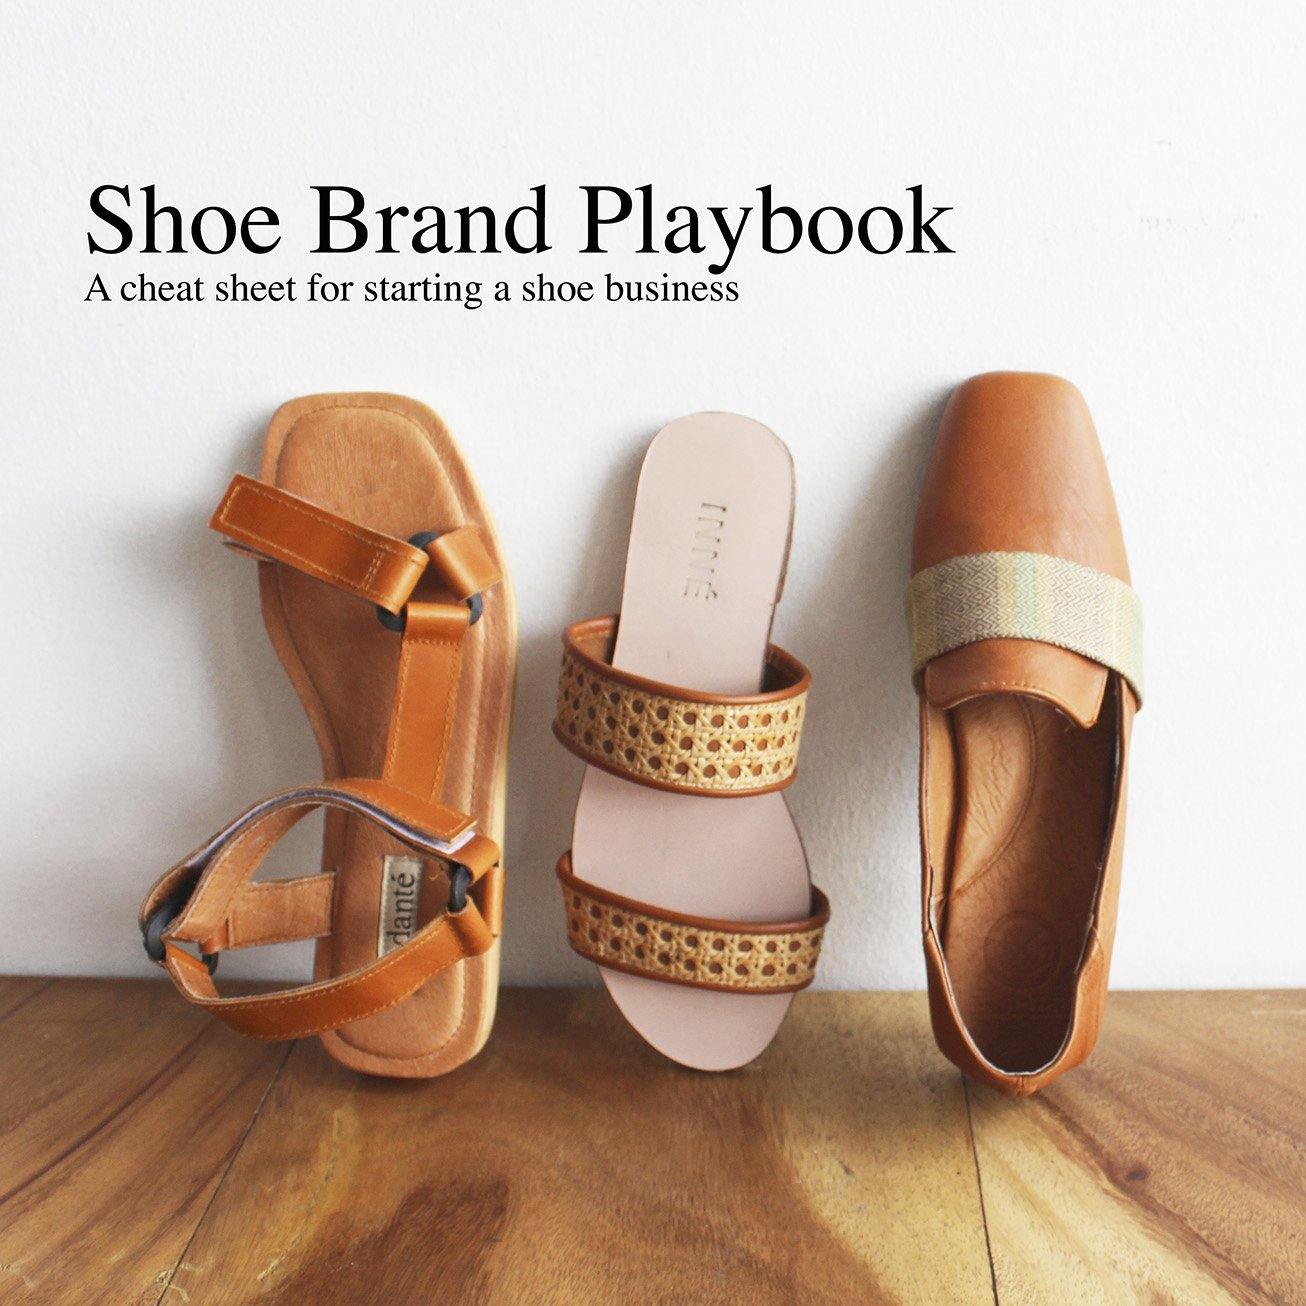 Shoe Brand Playbook – Risqué Manufacturing